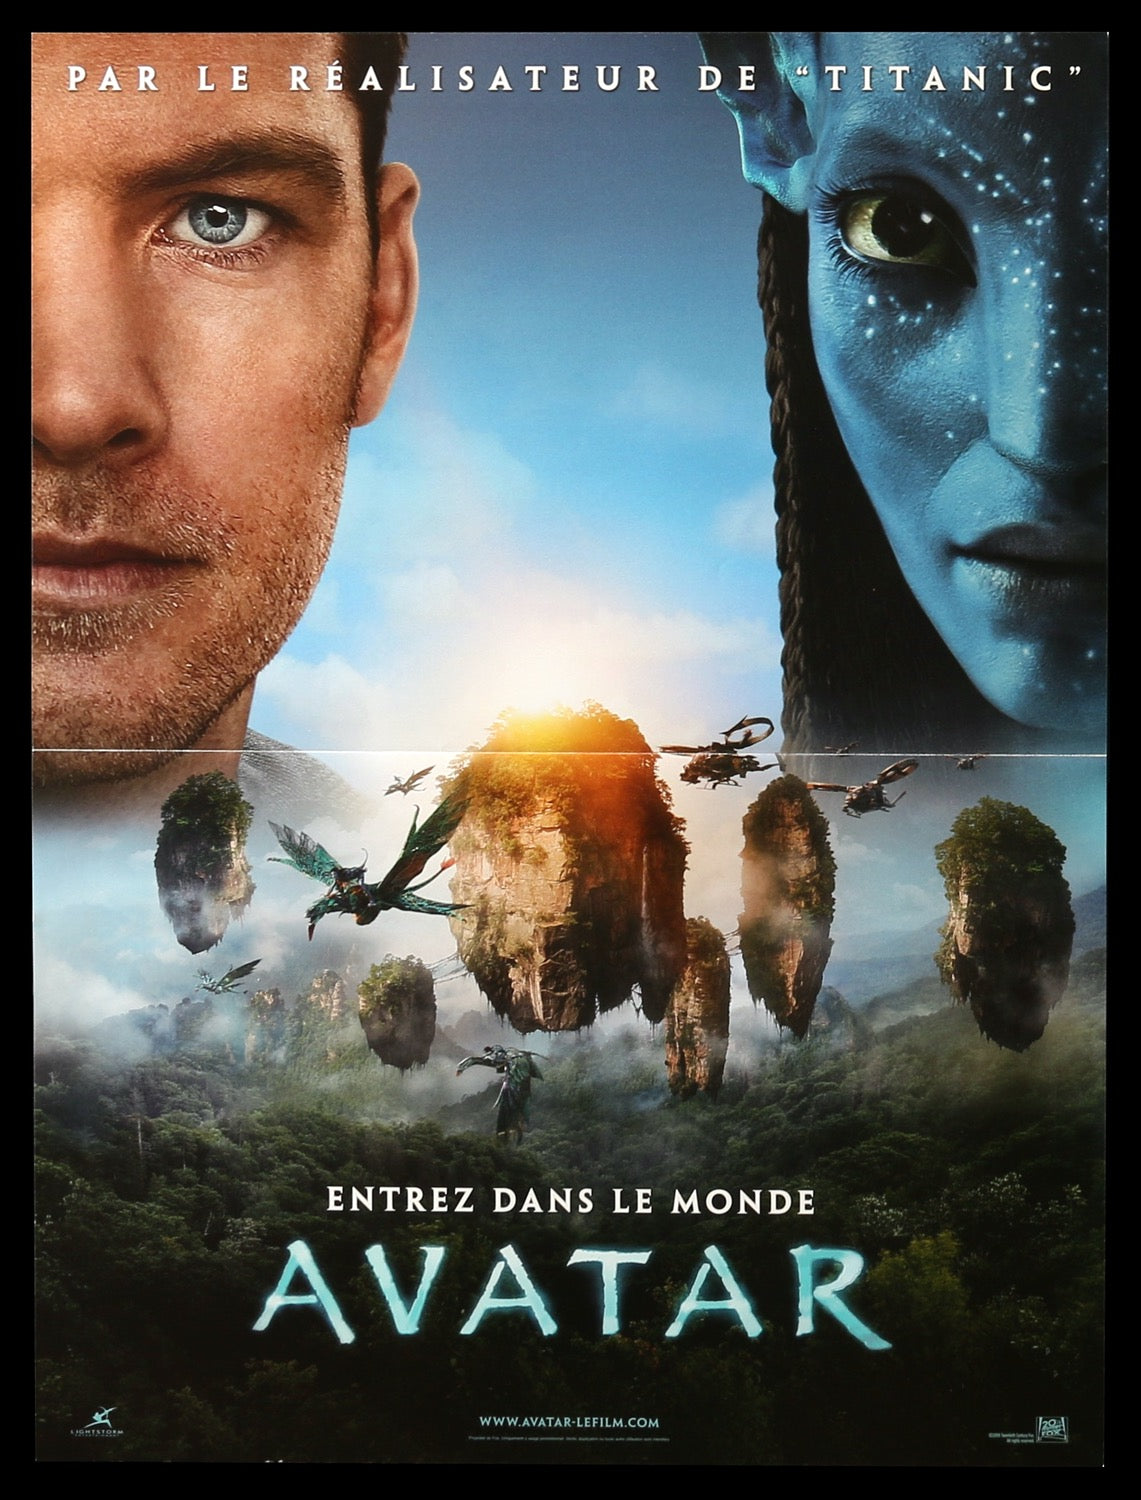 Avatar The Way of Water Movie Review Does It Live Up to the Original   ReelRundown